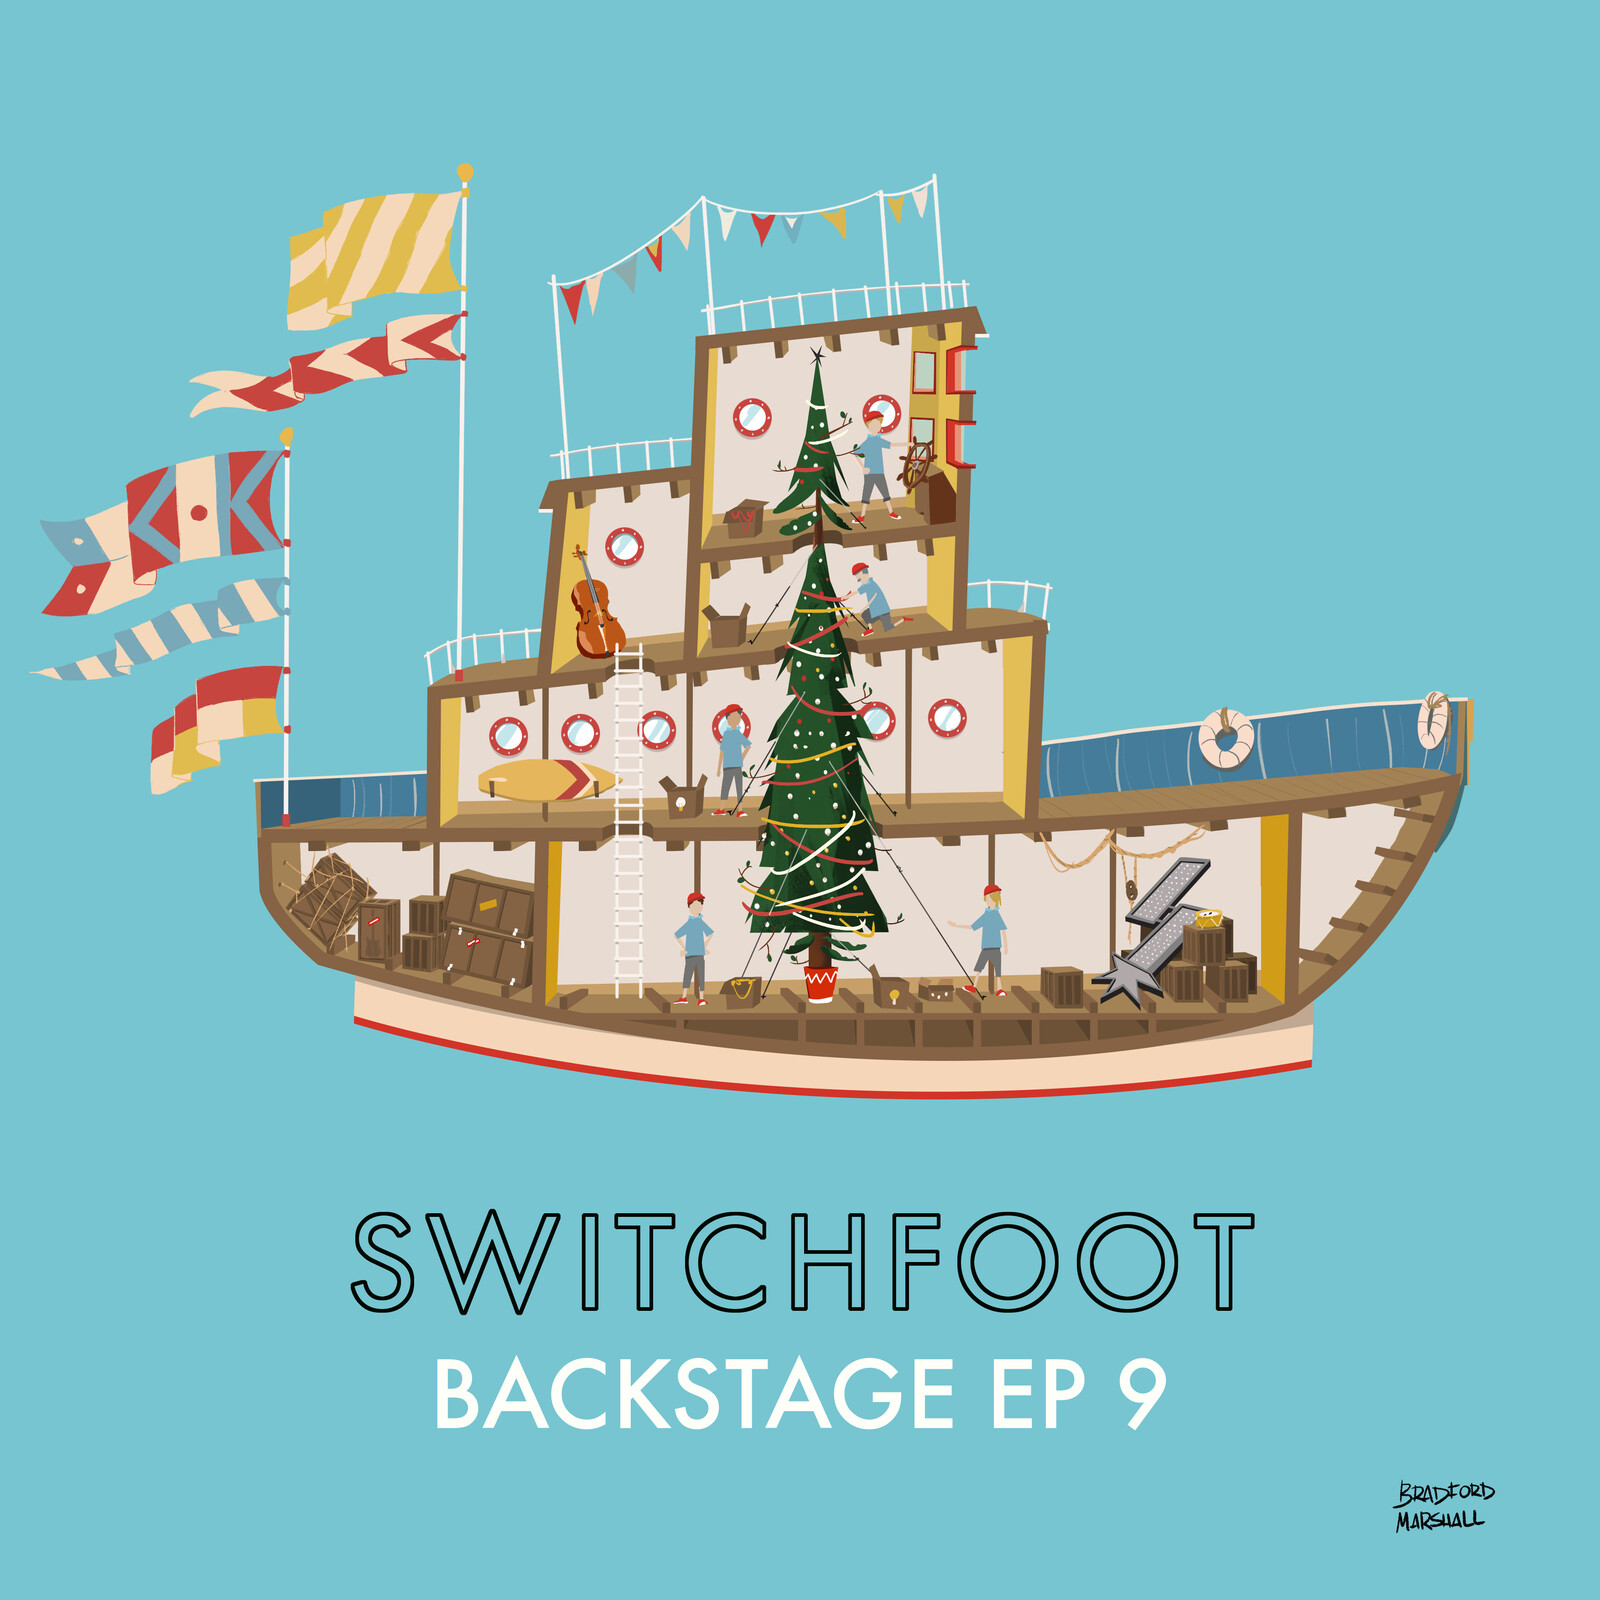 Switchfoot Backstage EP 9 - Official album artwork 